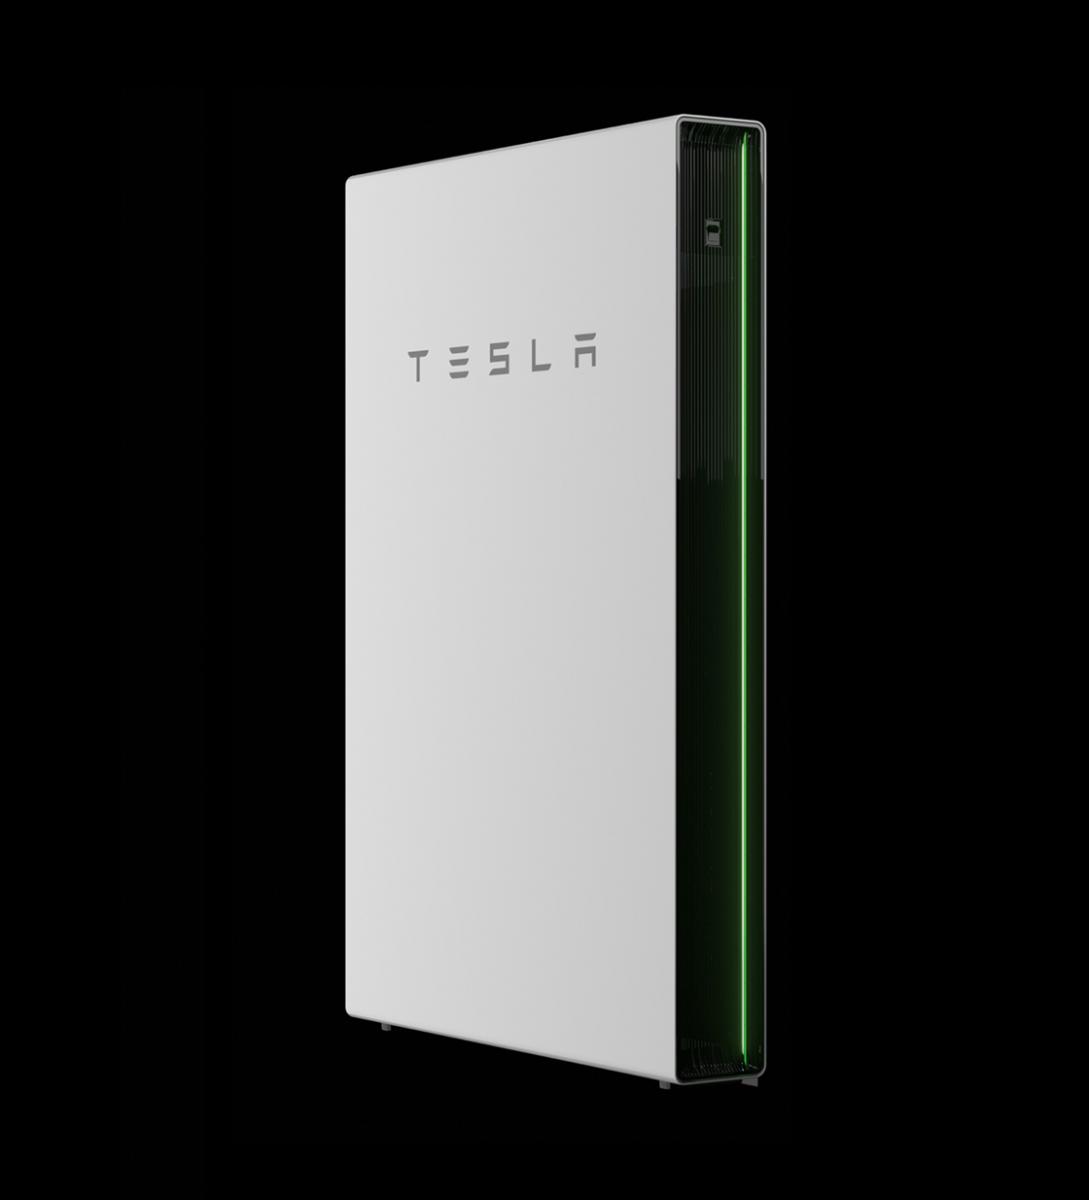 Powerwall home battery by Tesla